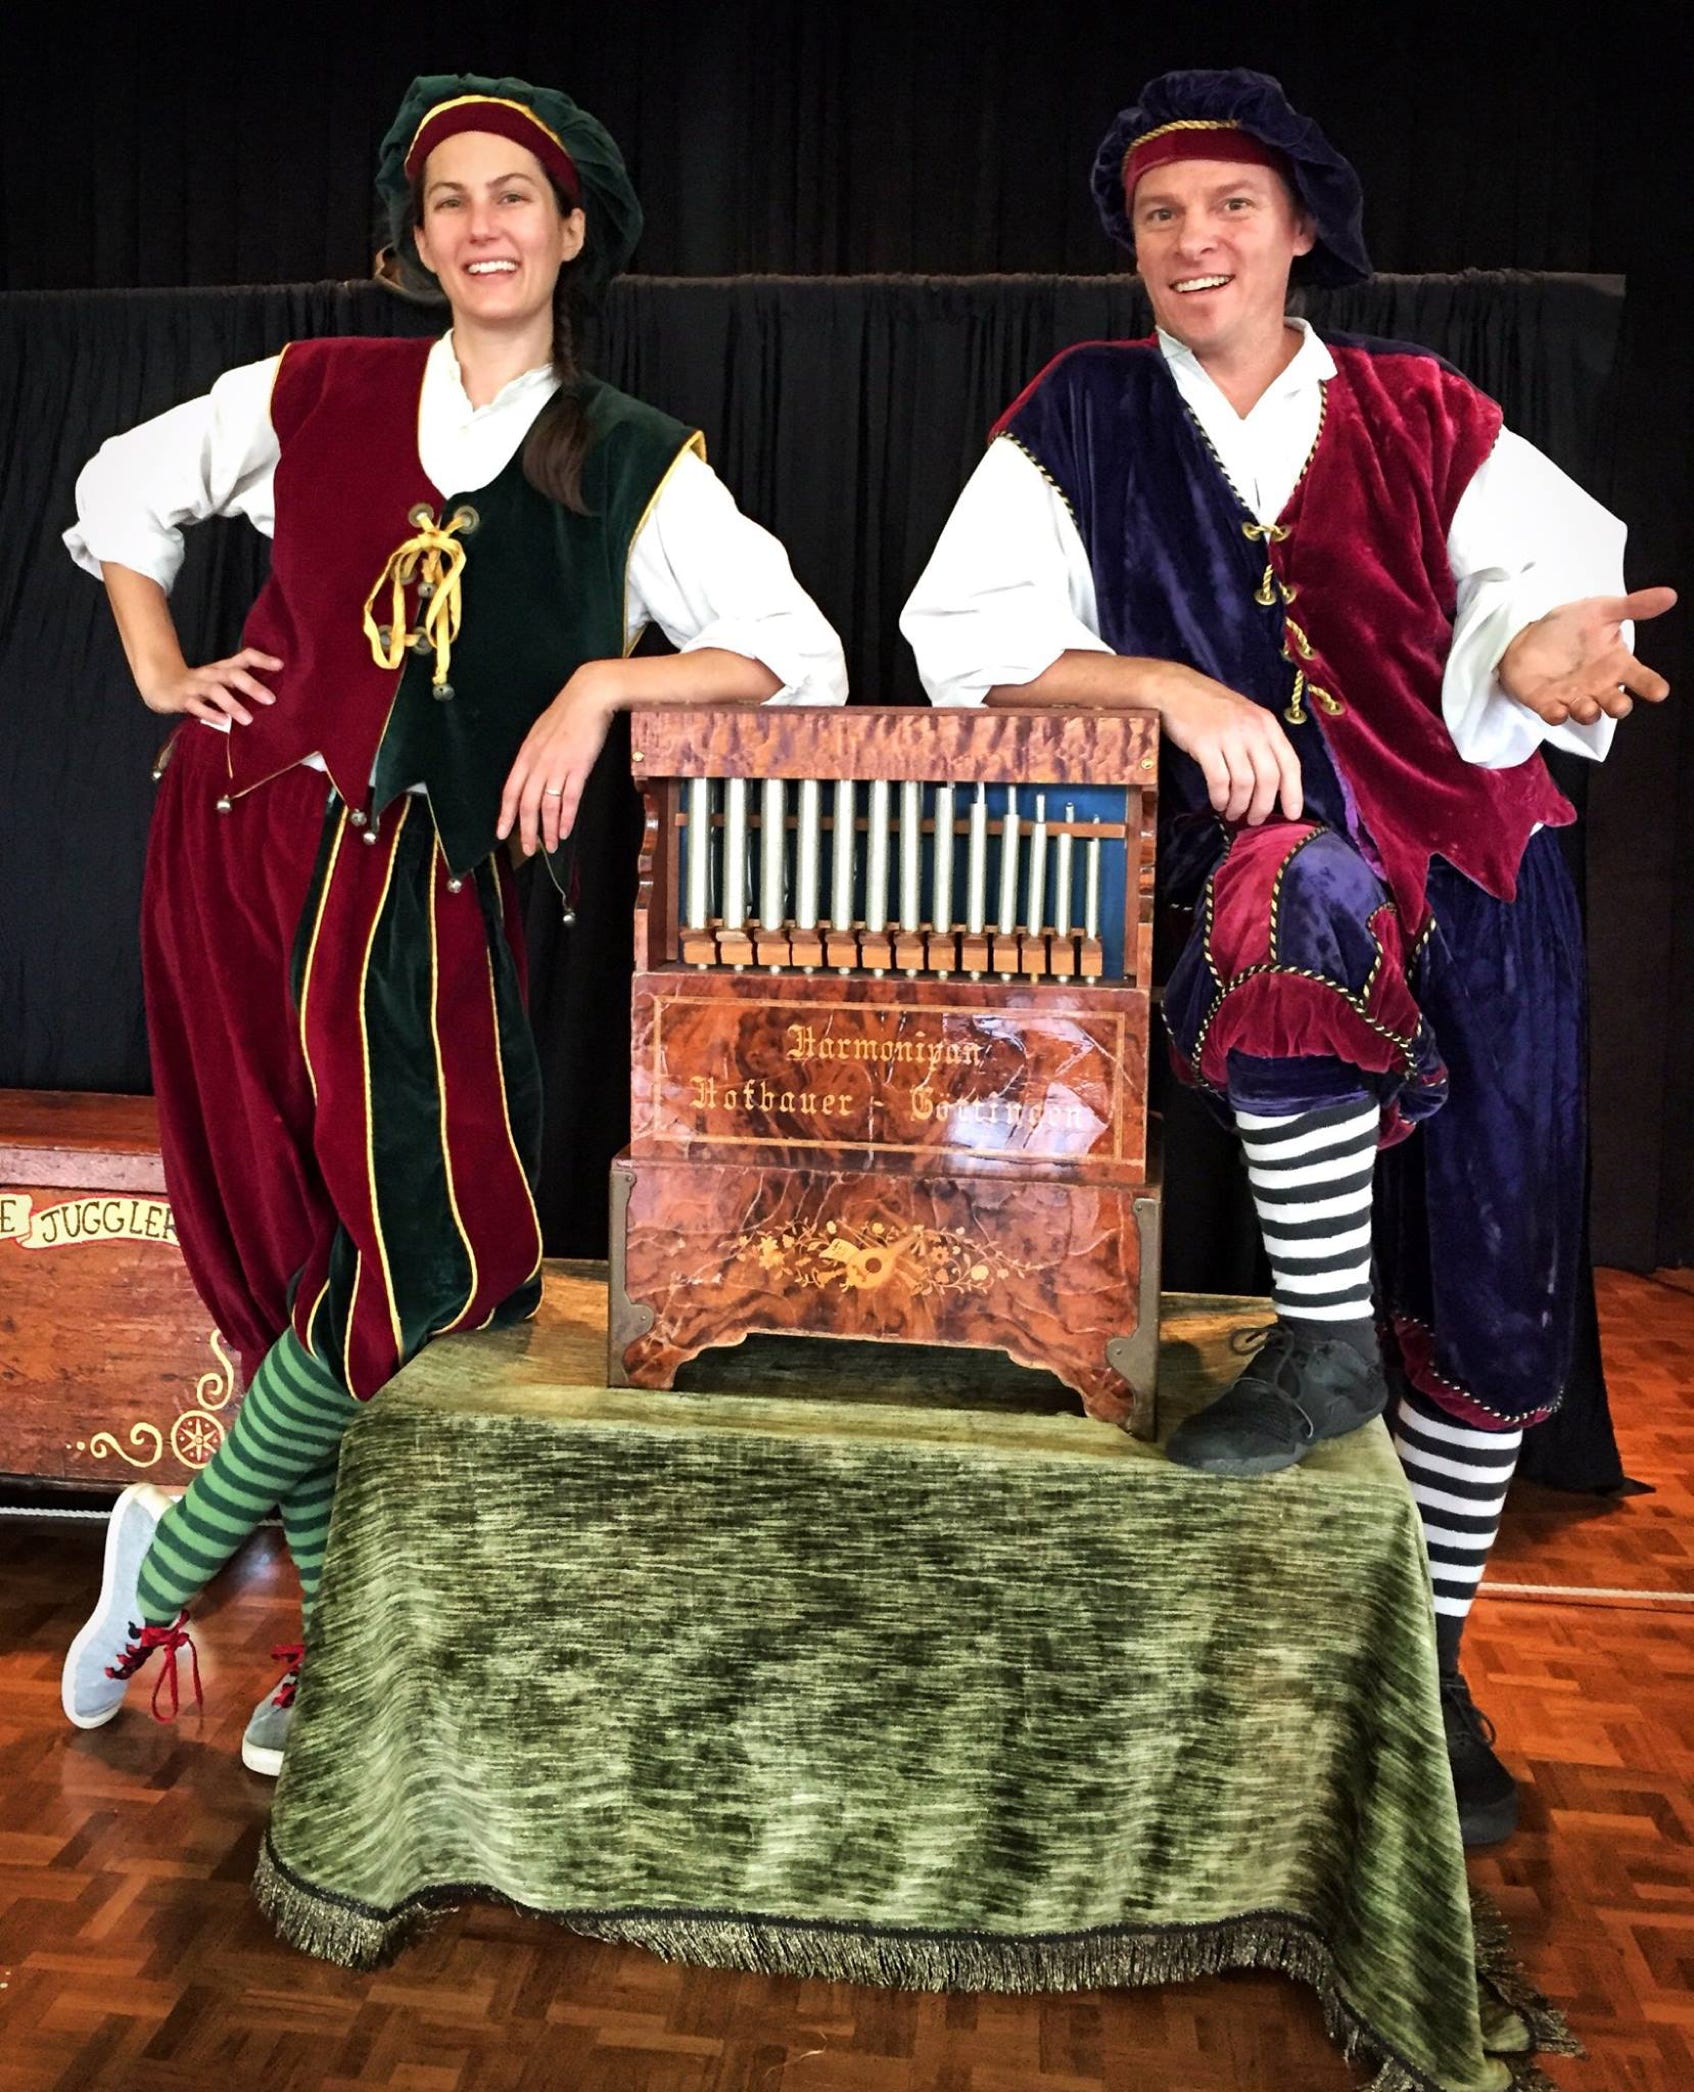 2 jugglers dressed in velvet holiday costumes standing with a calliope